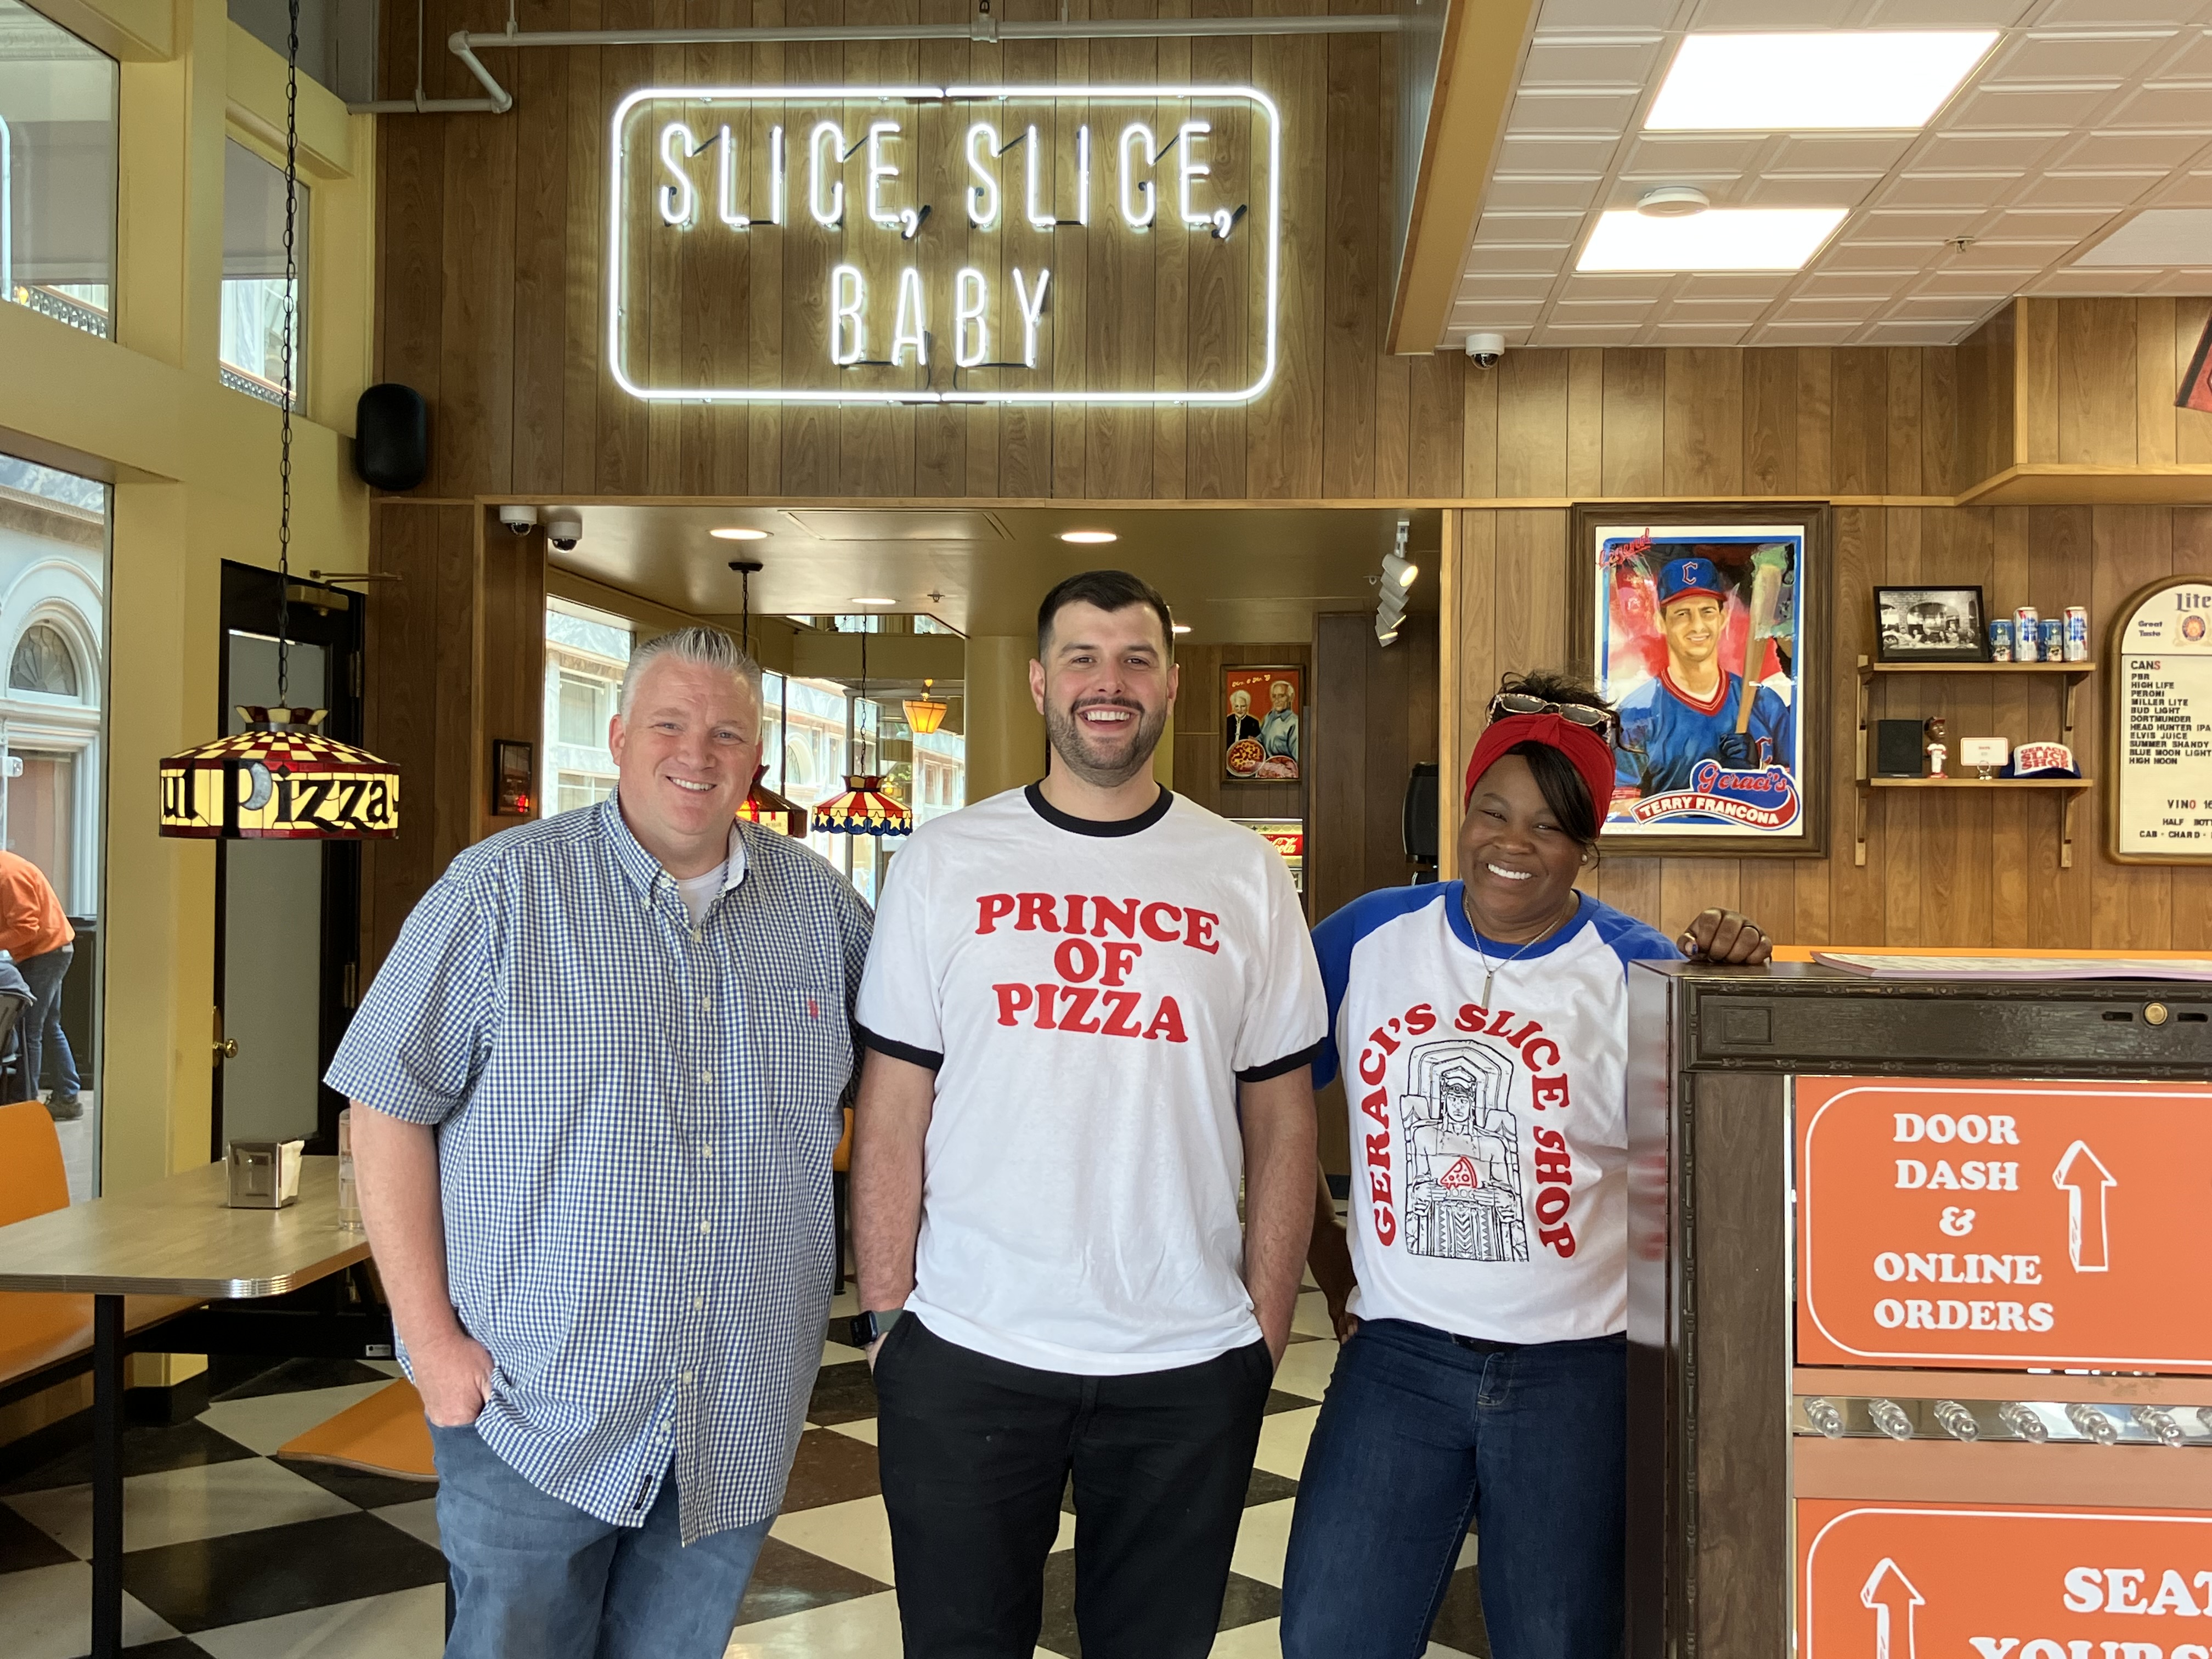 Geraci’s Slice Shop is set to open this week in downtown Cleveland with a distinct ’80s vibe.